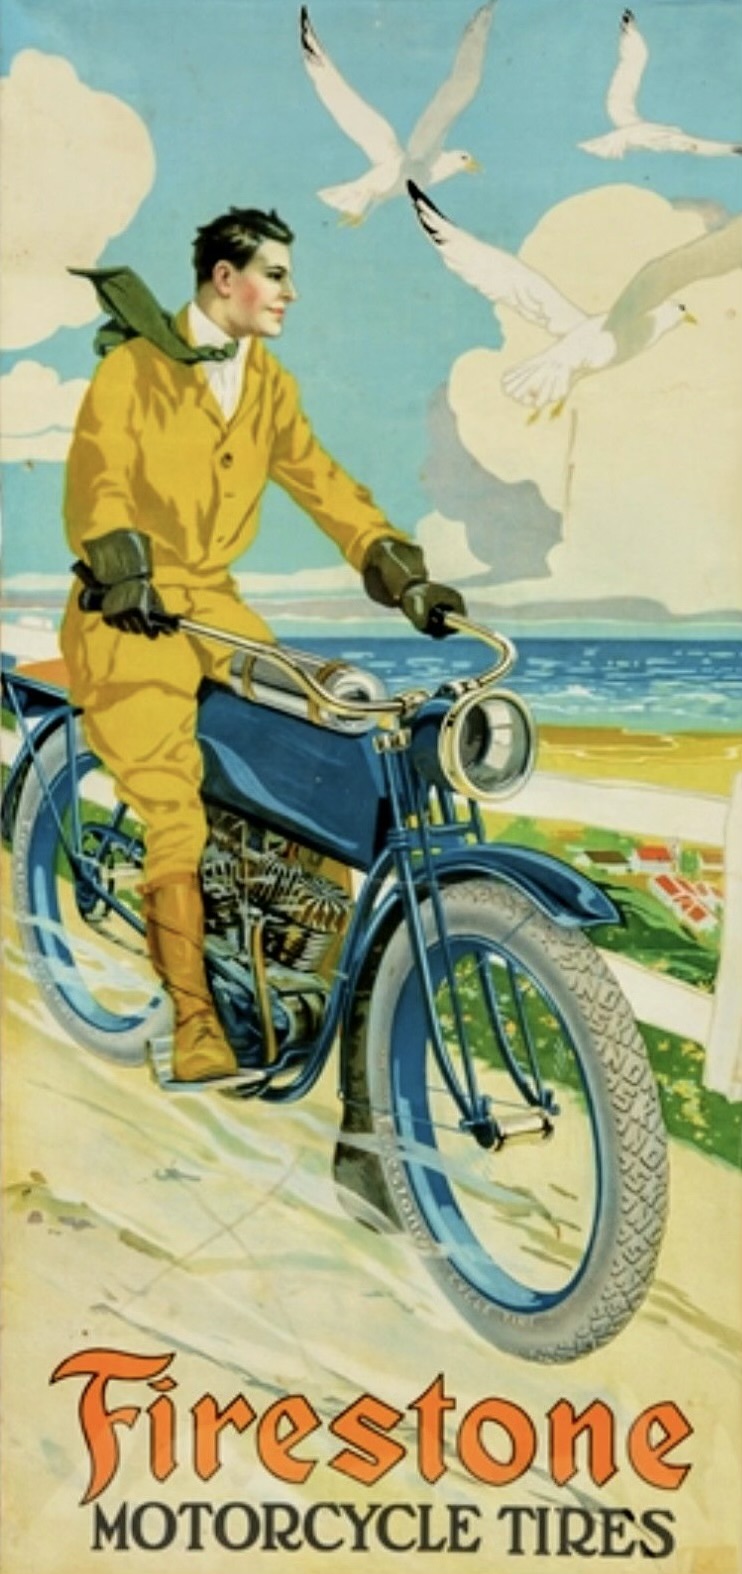 Firestone Motorcycle Tires Poster mounted to linen